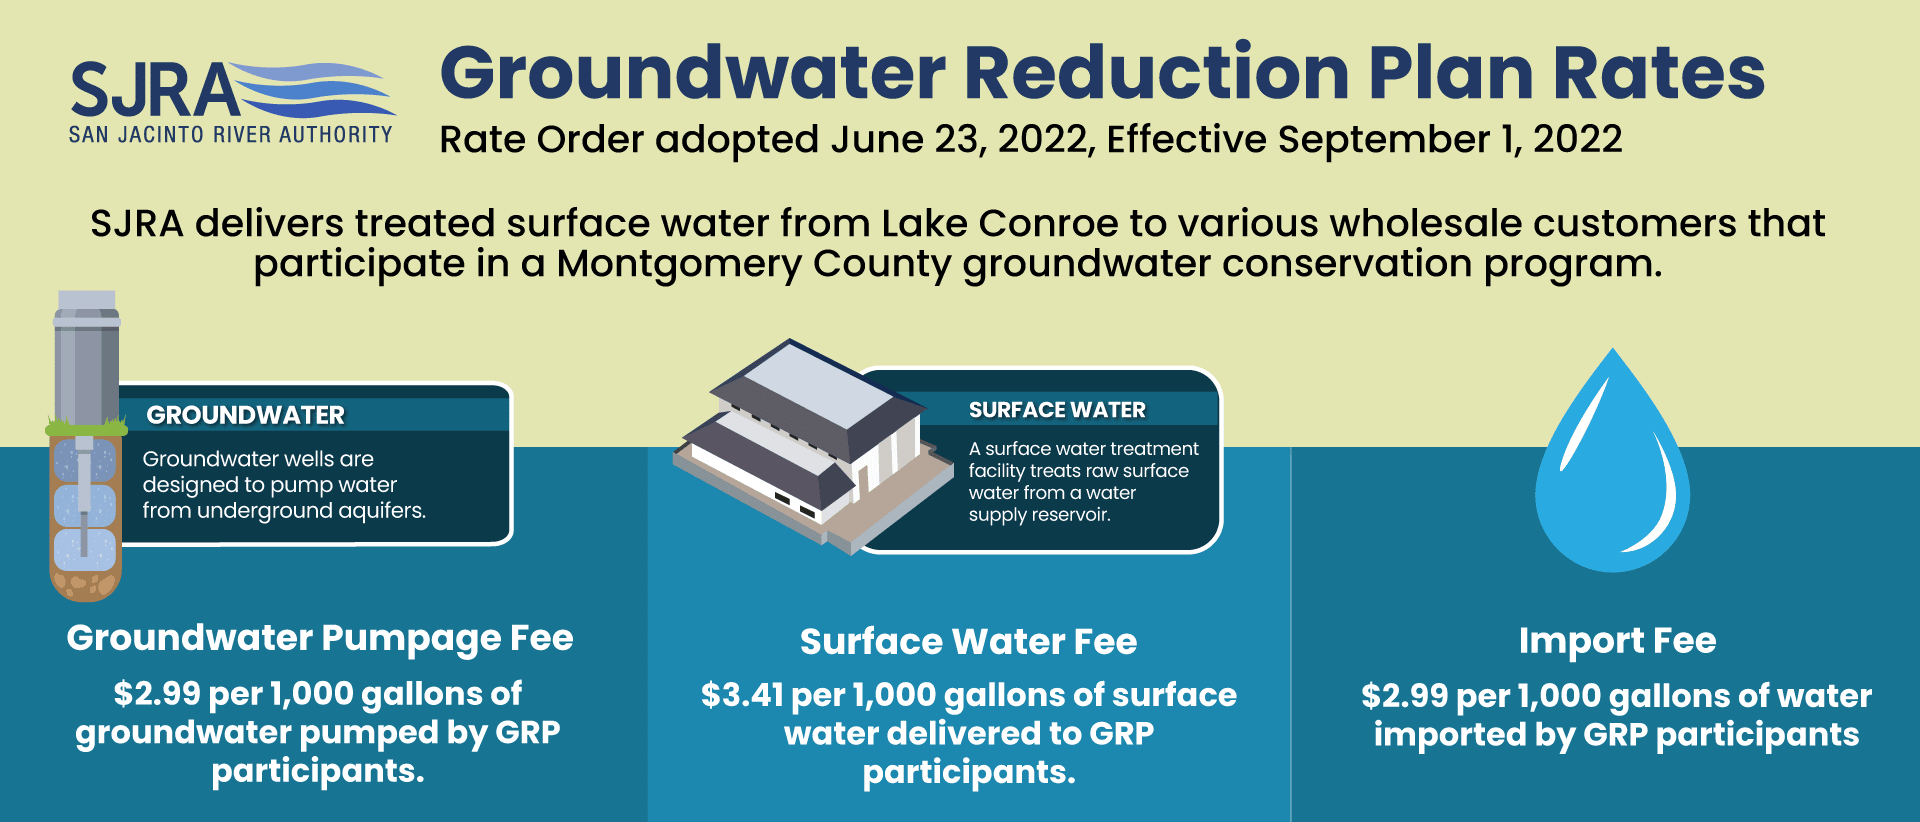 Groundwater Reduction Plan Rates